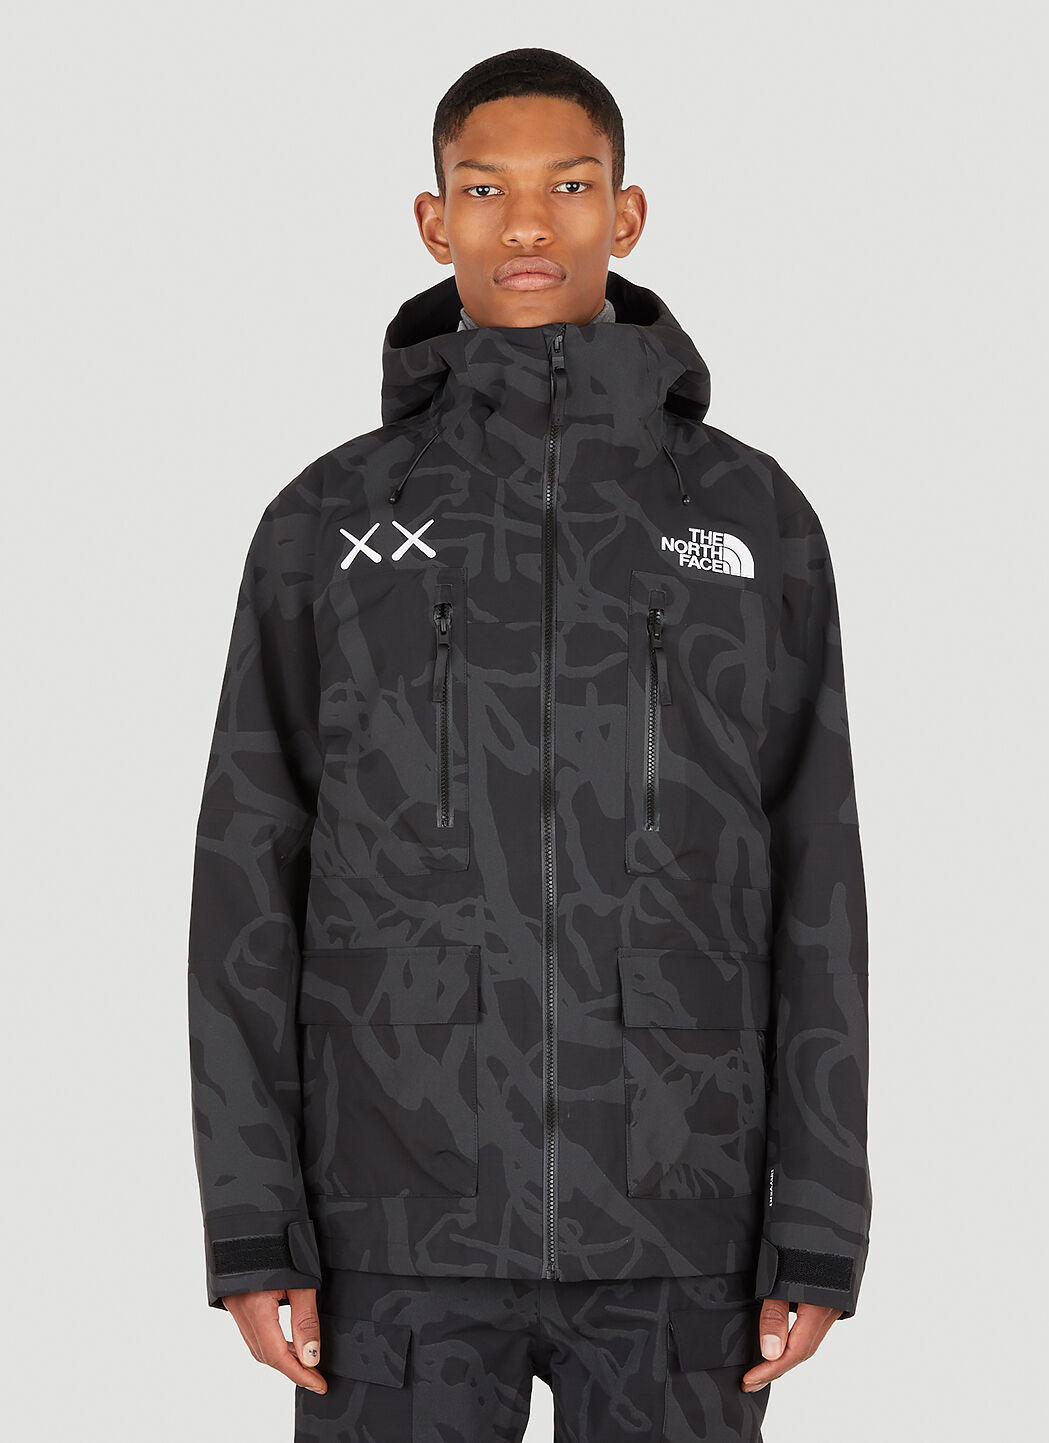 The North Face x KAWS Freeride Jacket in Black | LN-CC